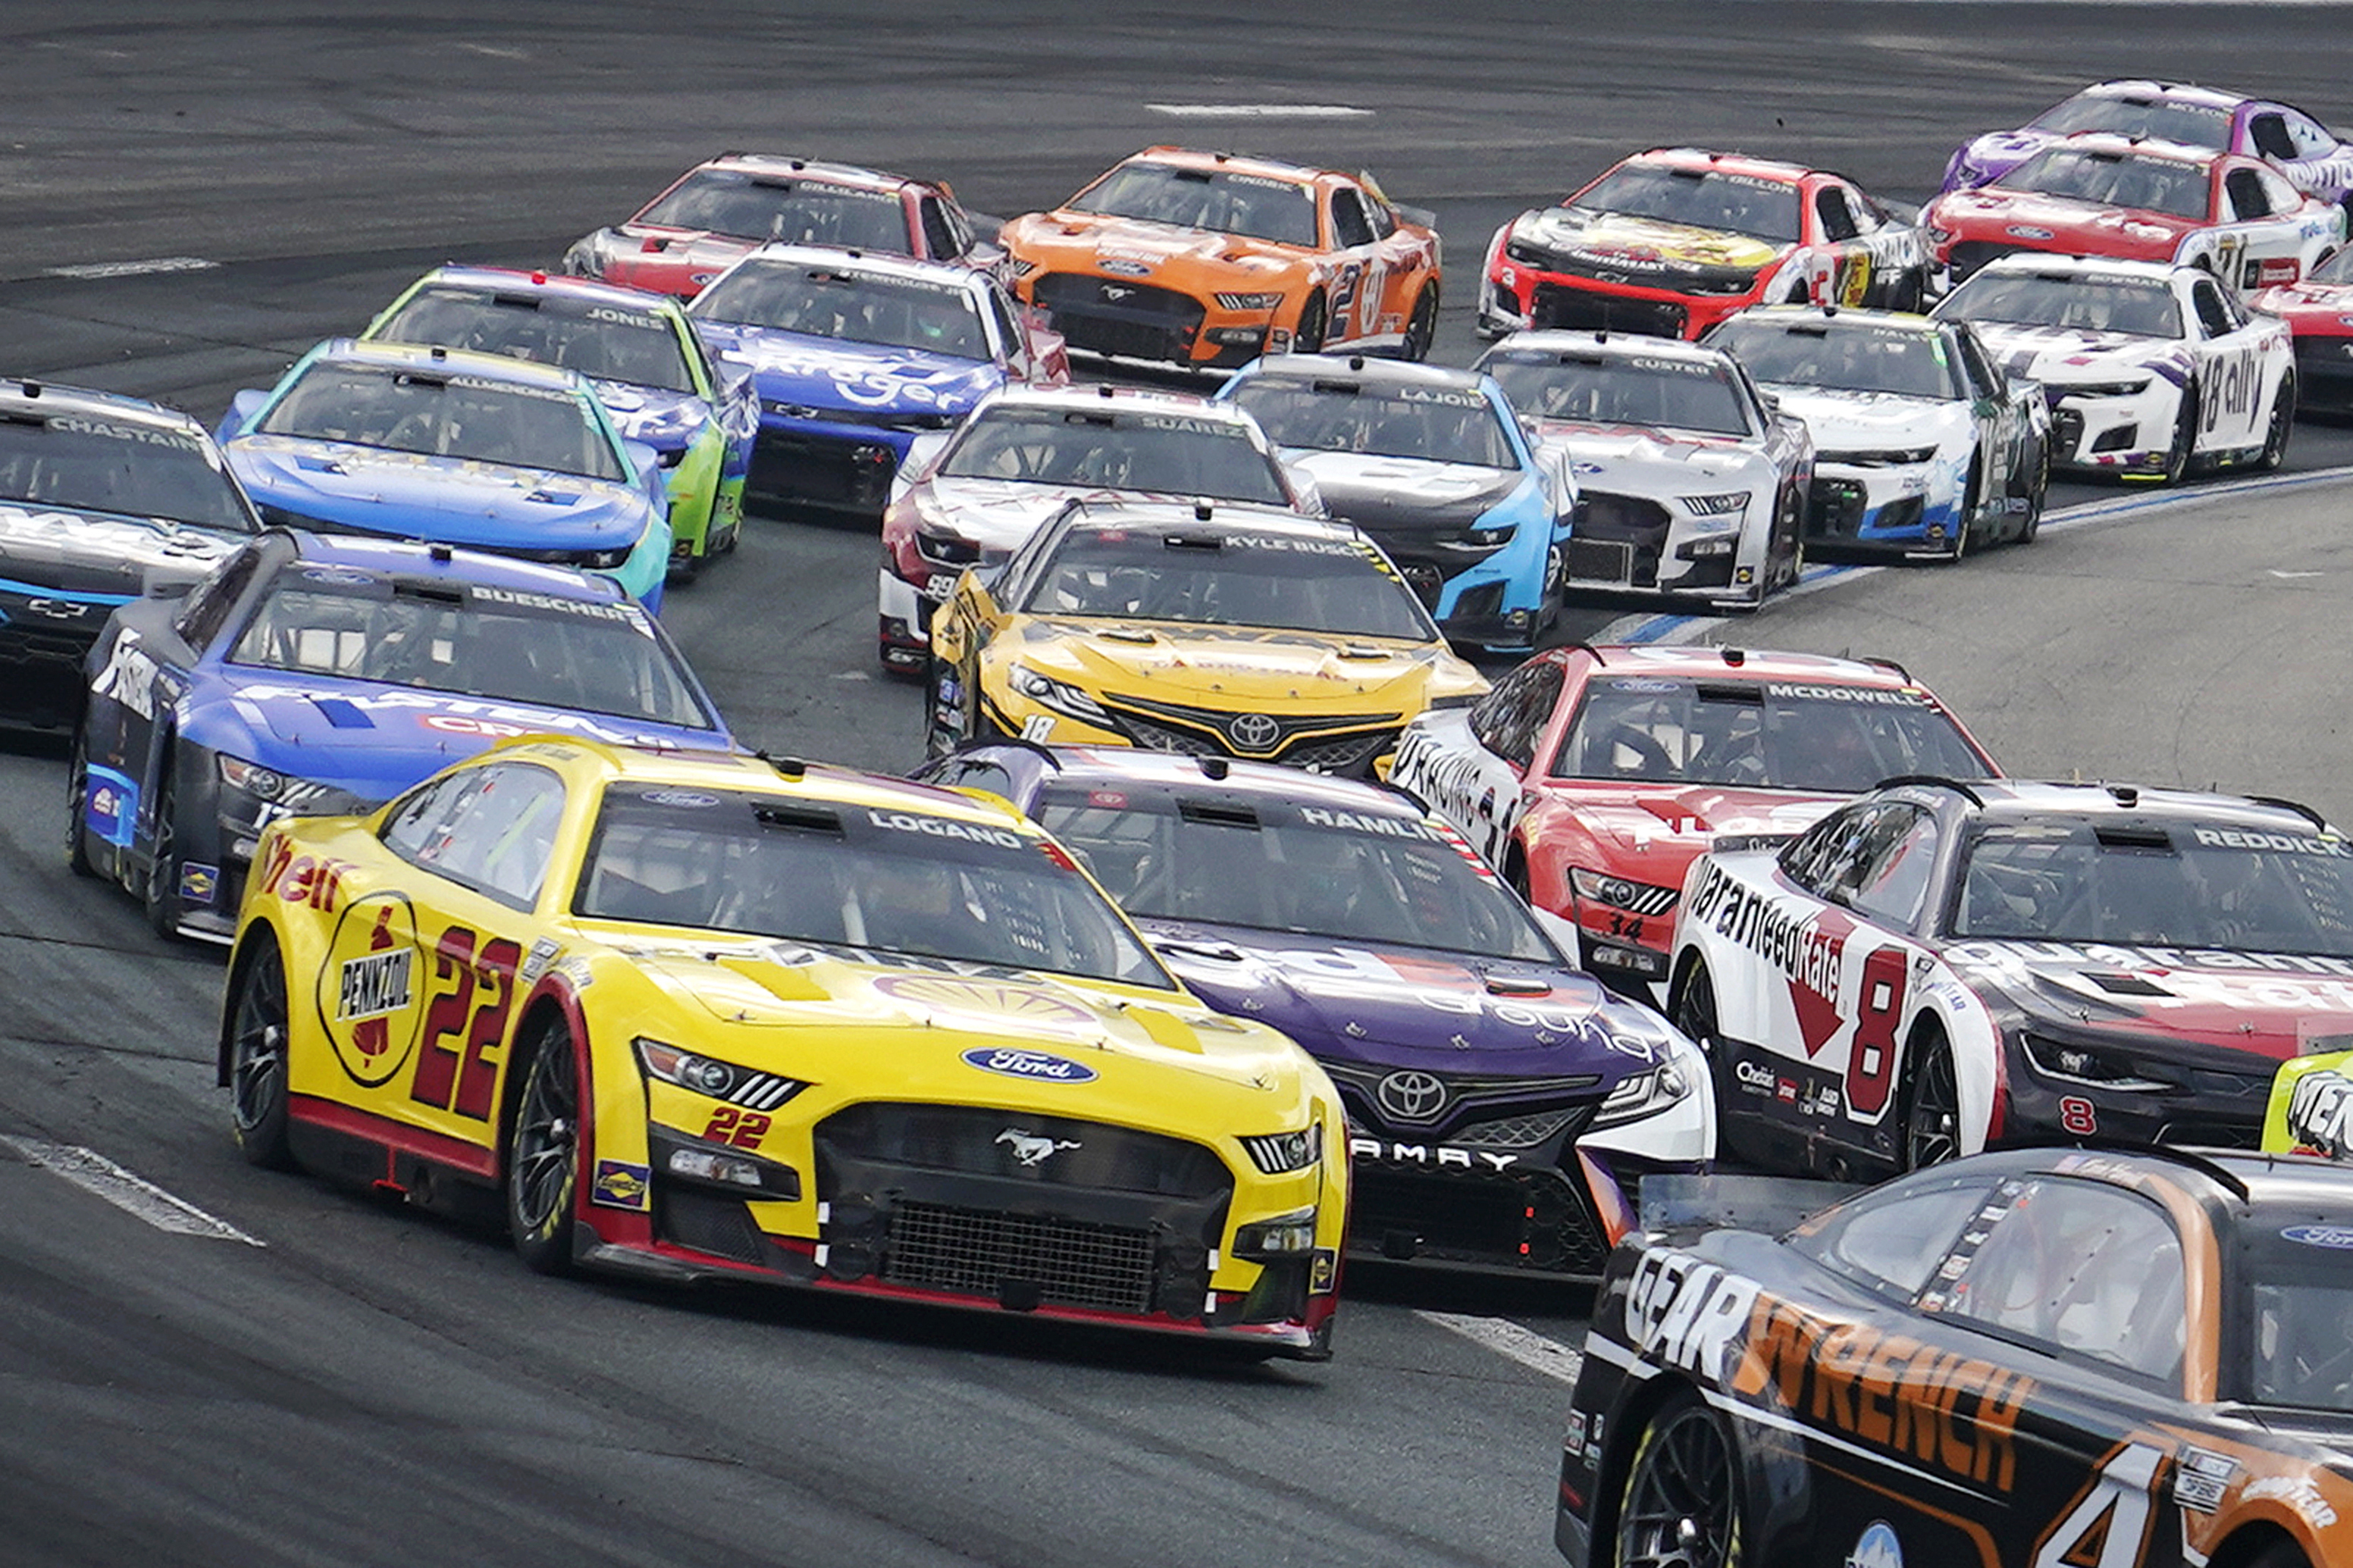 A tight pack of cars enters Turn 2 during a NASCAR Cup Series auto race at the New Hampshire Motor Speedway, Sunday, July 17, 2022, in Loudon, N.H. (AP Photo/Charles Krupa)